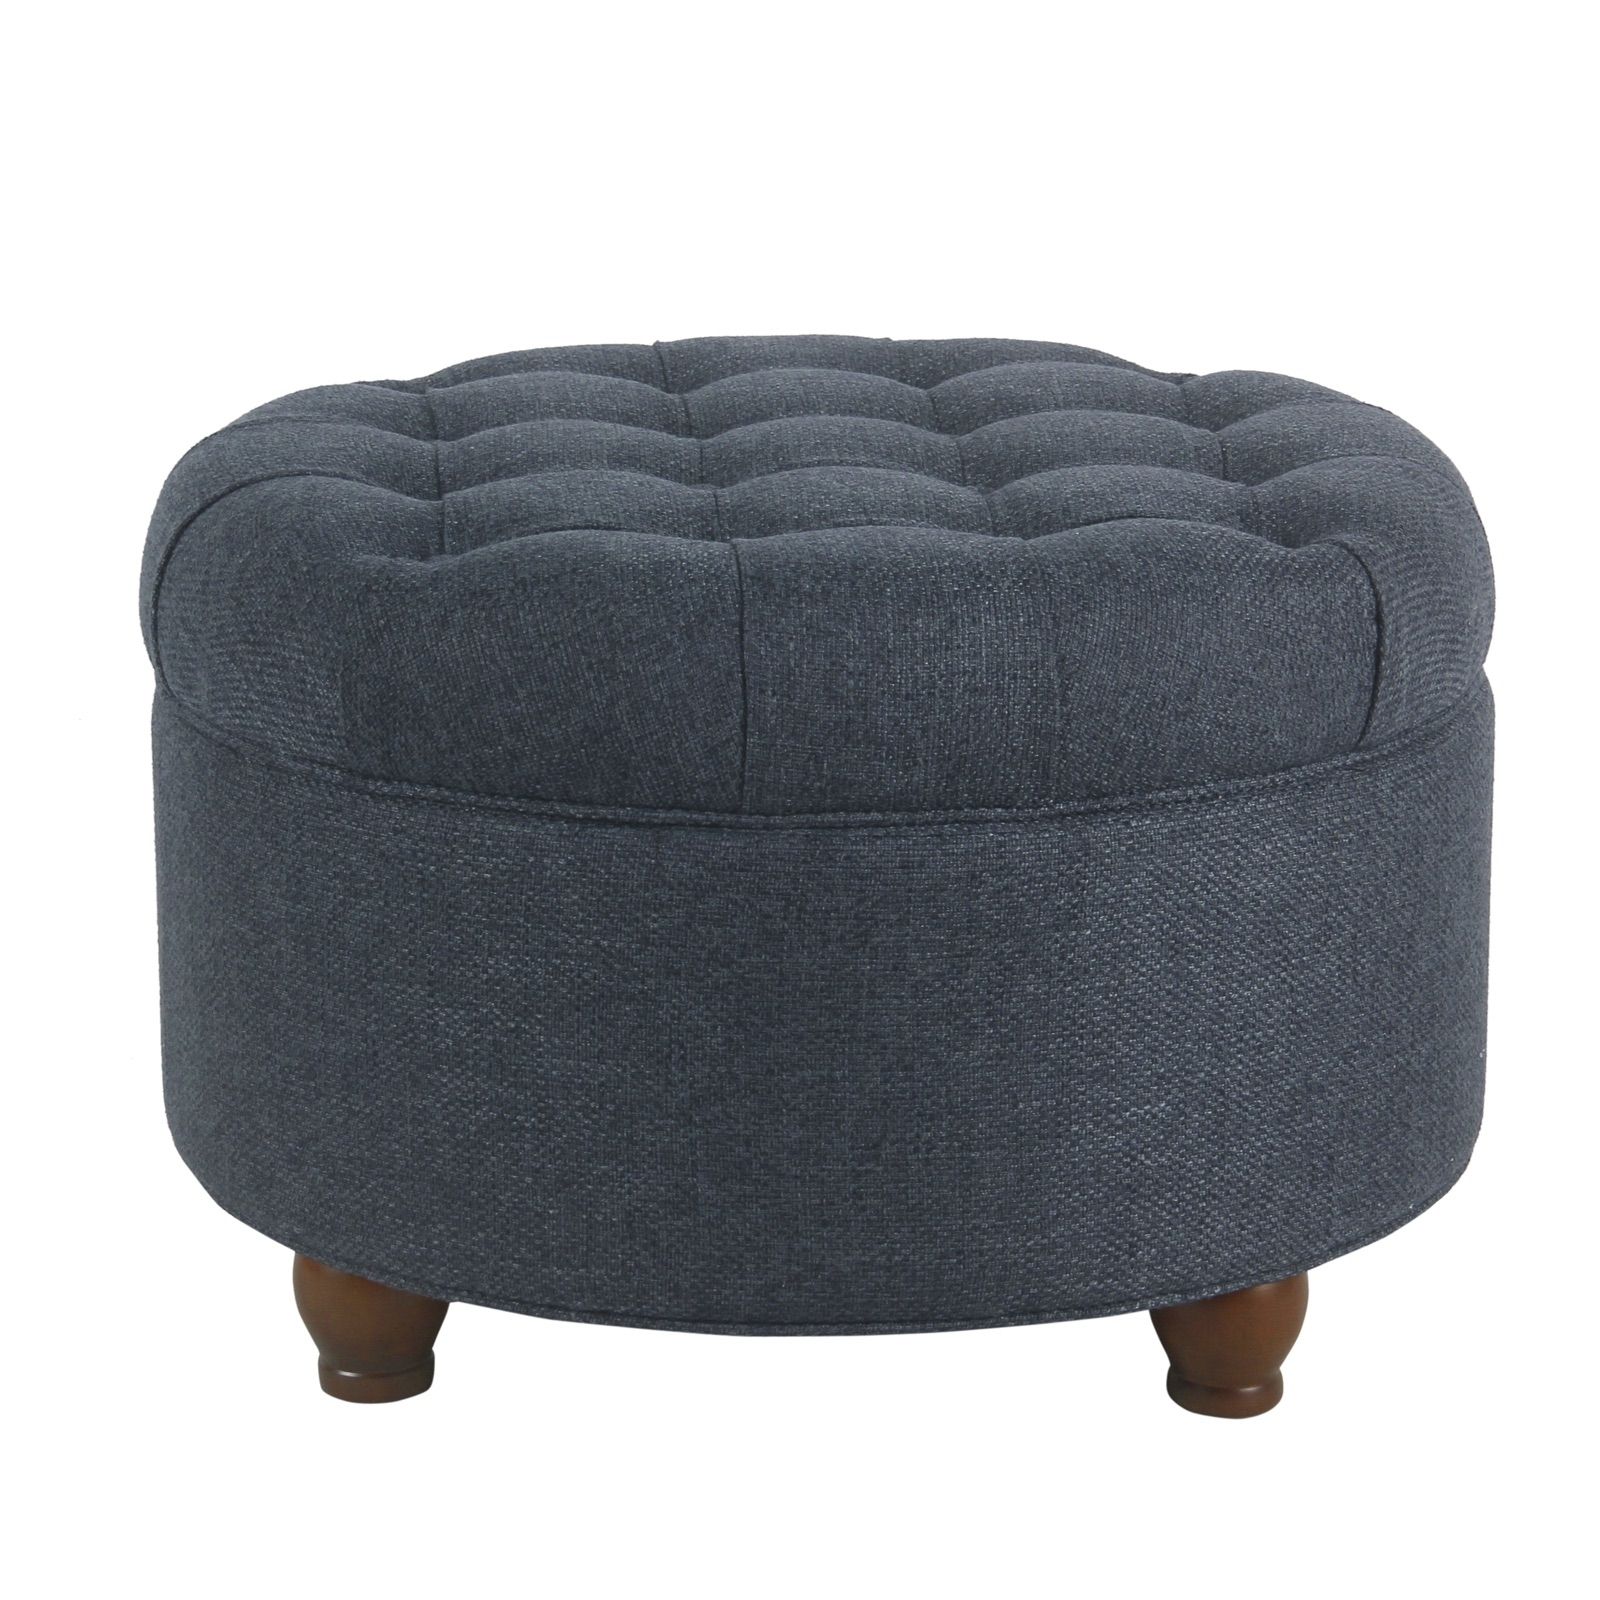 Homepop Large Tufted Round Storage Ottoman, Multiple Colors – Walmart With Regard To Tufted Ottomans (View 18 of 20)